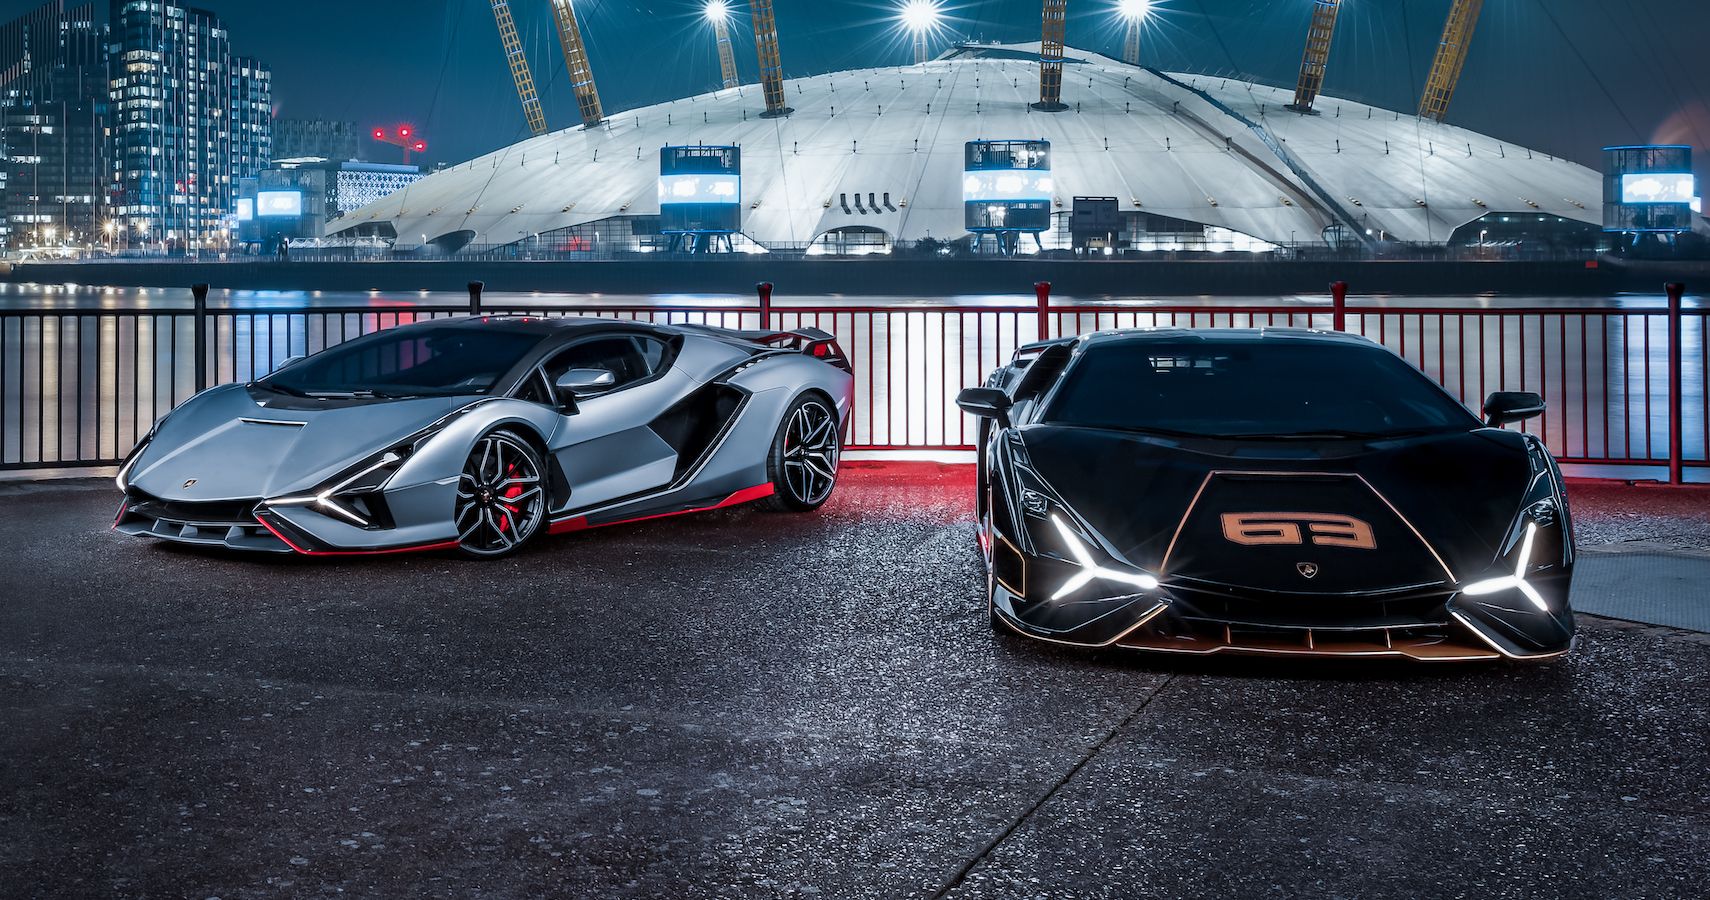 Two Lamborghini Sians Arrive In London For A Stunning Photoshoot Before Delivery